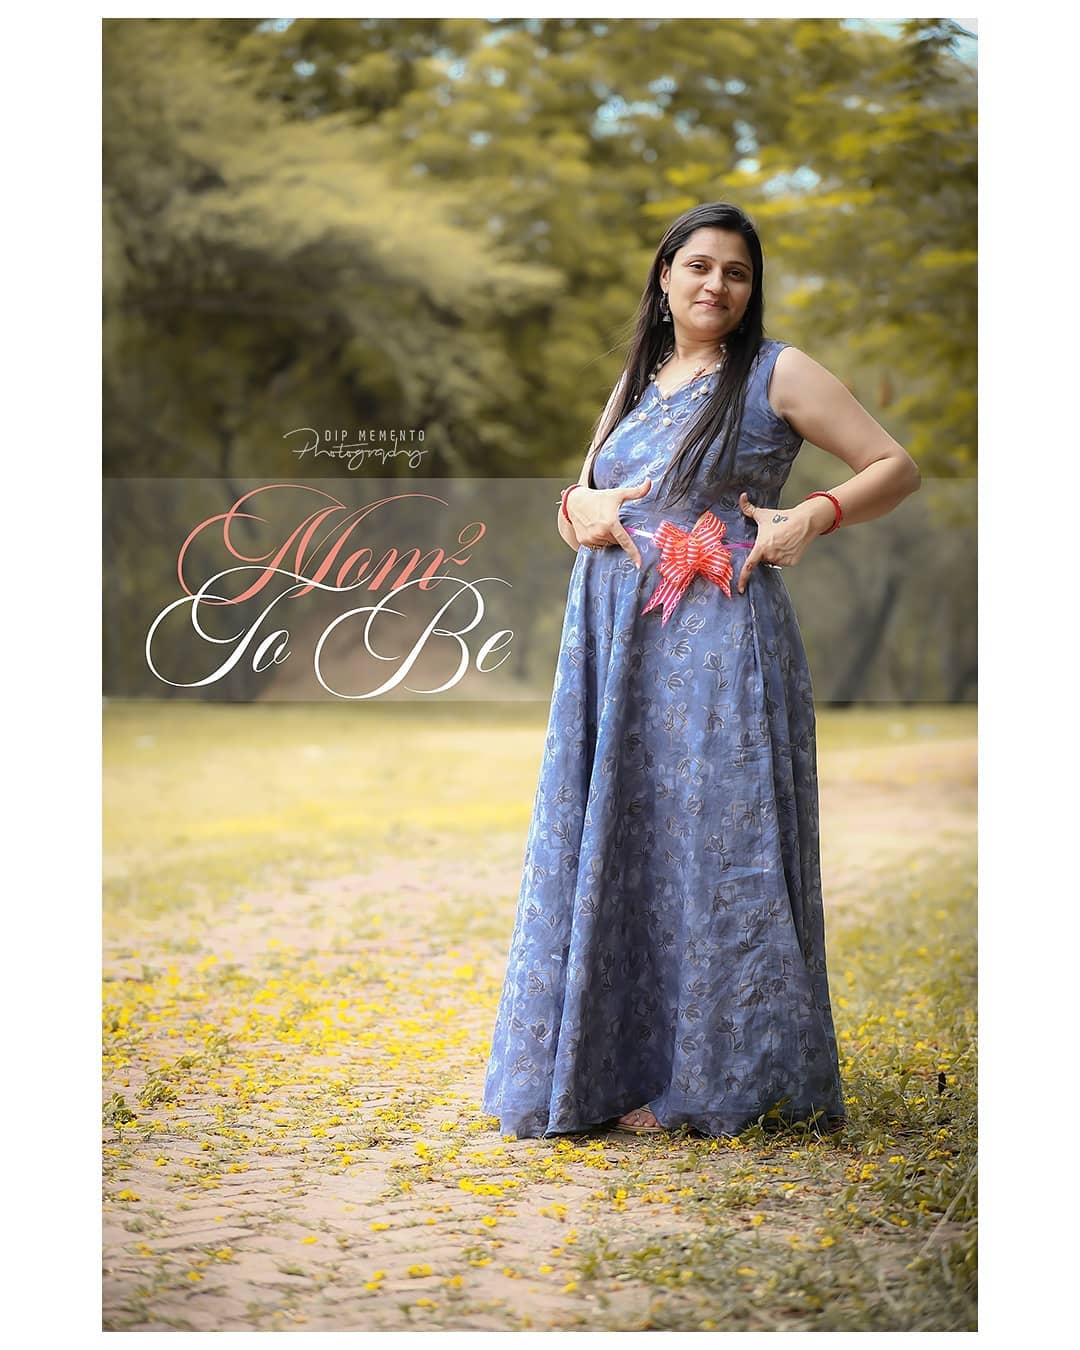 💞Waiting for the biggest Gift from GOD👶  Shoot by : @dip_memento_photography
@meandmyphotography11
.
.
MOM to be..
Maternity Shoot.
.
.
Shoot With Canon 5d Mark iv + #Godox Hss
@canonindia_official
.
#maternityphotographer #maternityphotography #maternity #mommytobe #momtobe #newmommy #pregnant #pregnancy #expectingmother #9924227745 #maternityportraits #maternitypictures #motherhood #maternityshoot #babybump #daddytobe #dadtobe #babyiscomingsoon #thebump #maternityshoot #maternityphotographyahmedabad #dipmementophotography #ahmedabadphotographer #mothertobe #expectingbaby #BABYBUMP #maternityposes #maternityposing